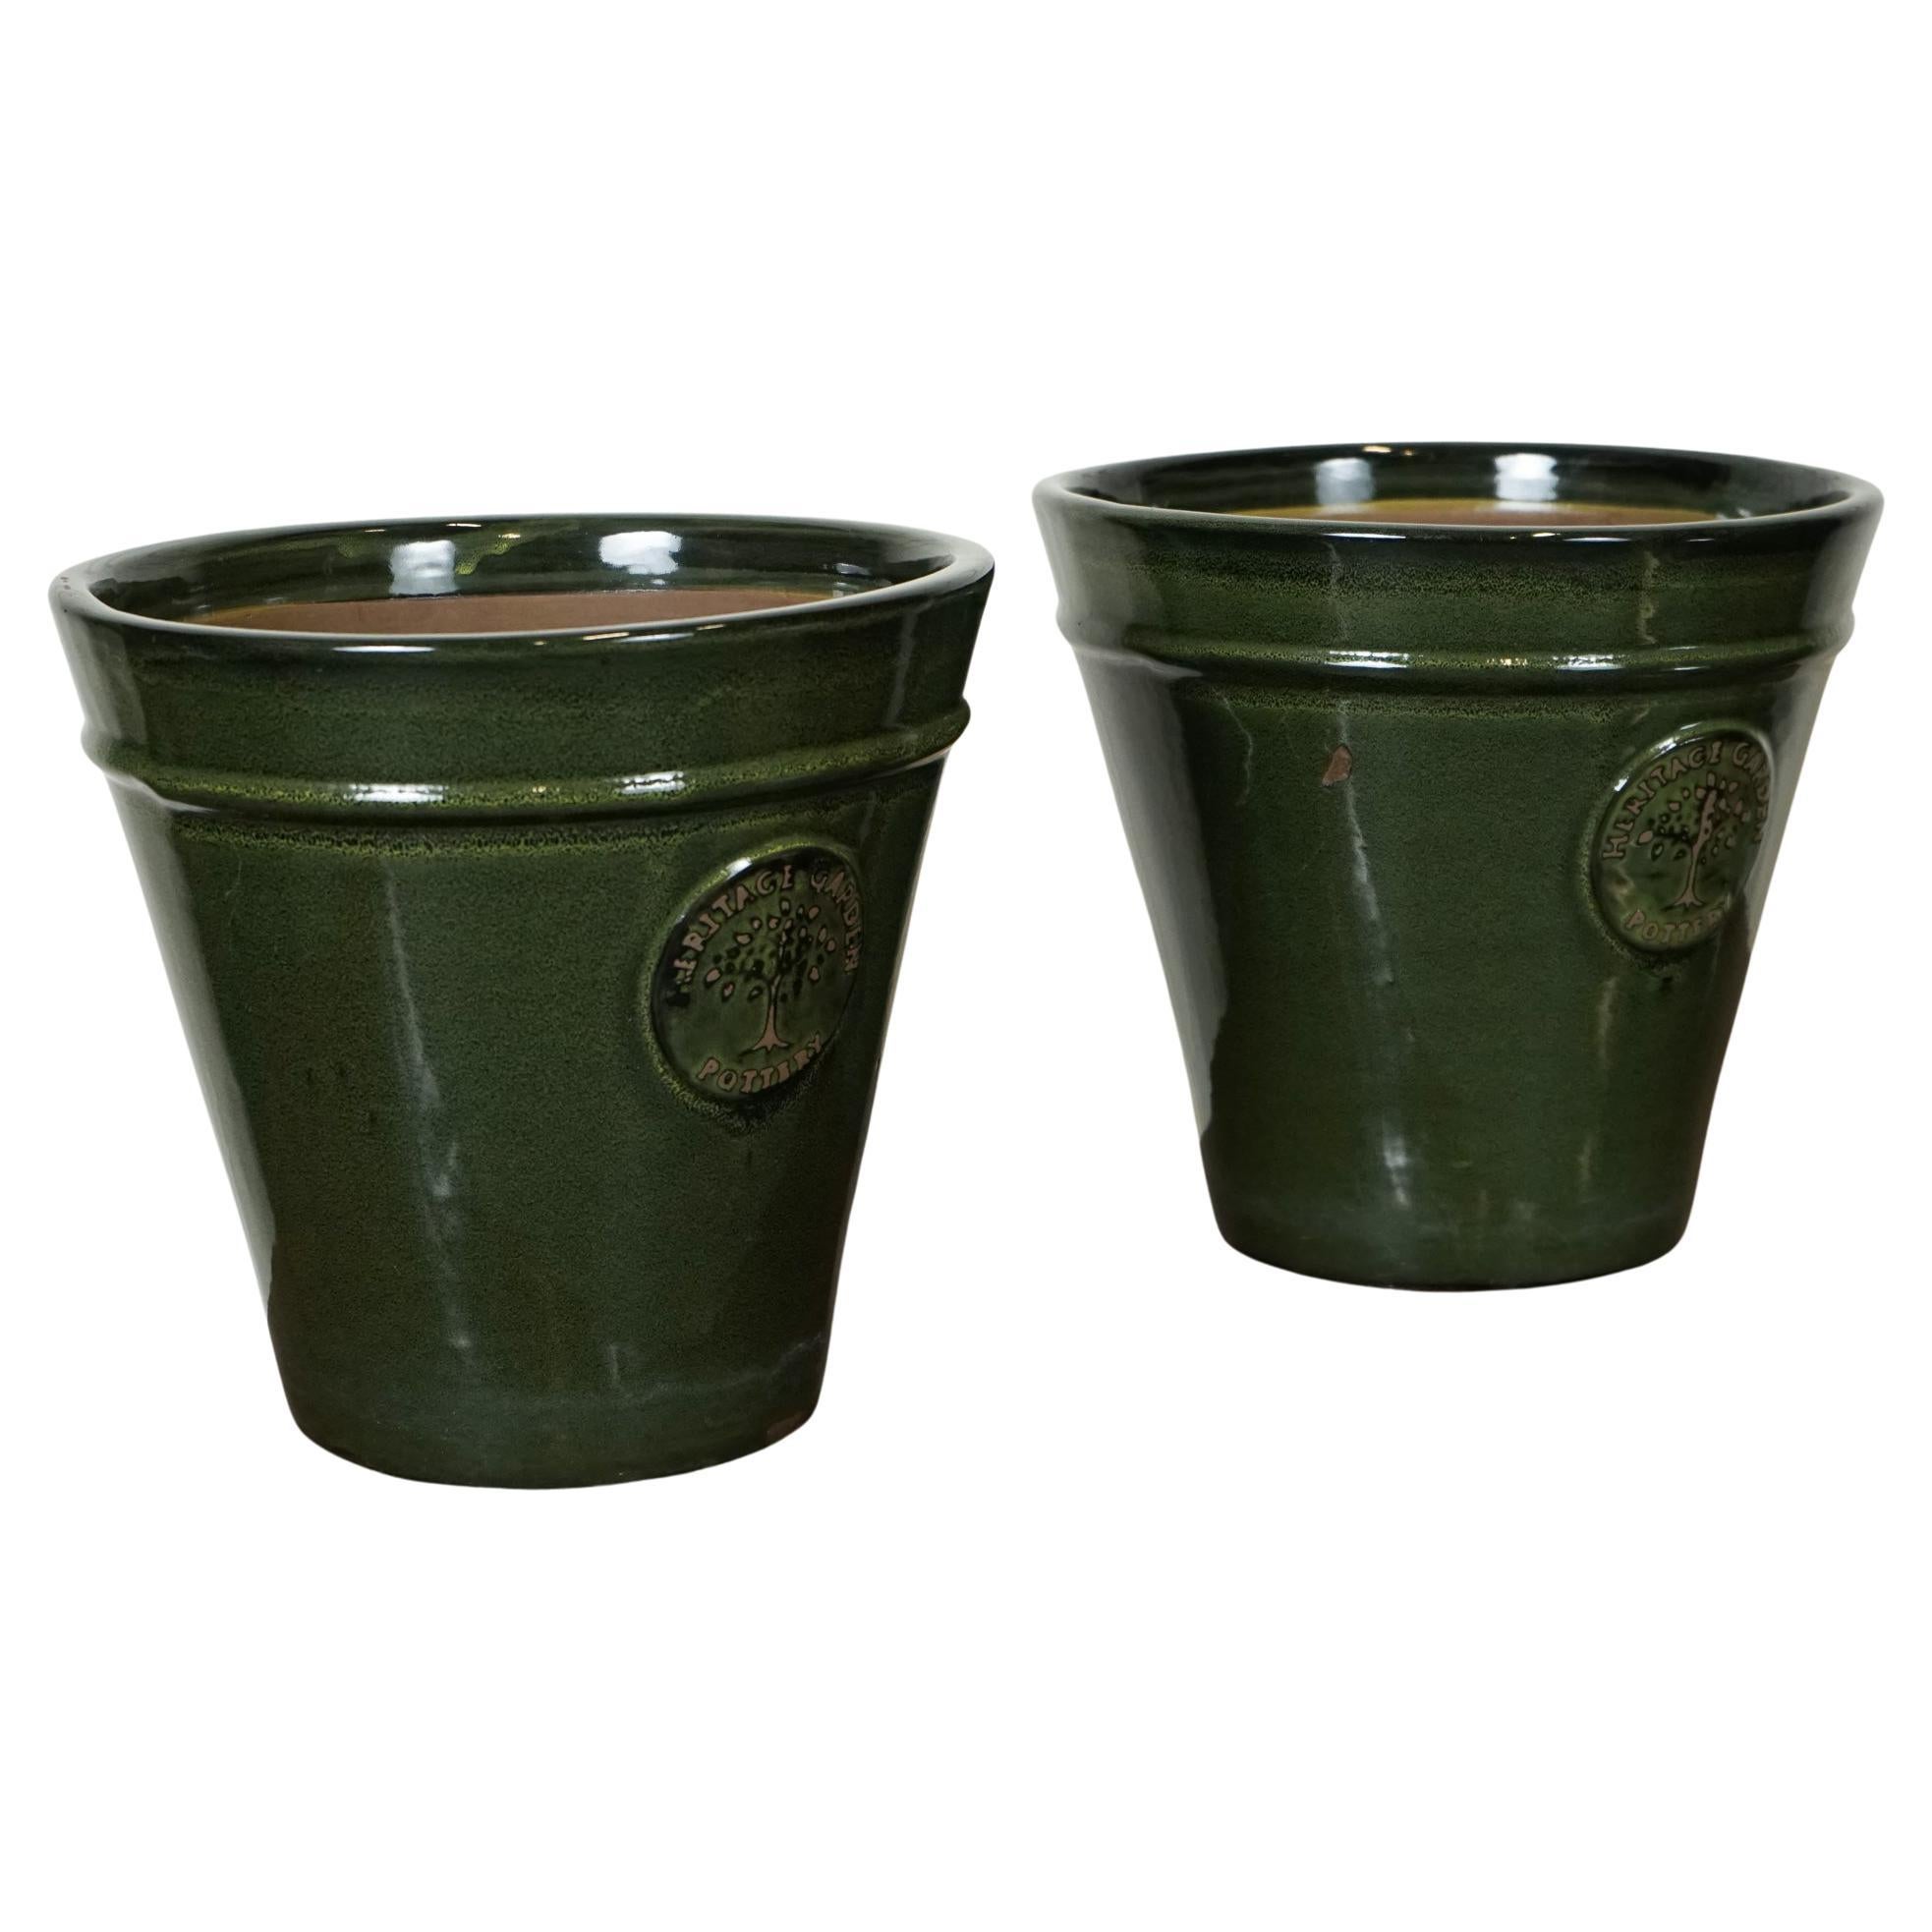 A PAIR OF GREEN EDWARDIAN STYLE FLOWER PLANT POTS BY HERITAGE GARDEN j1 For Sale